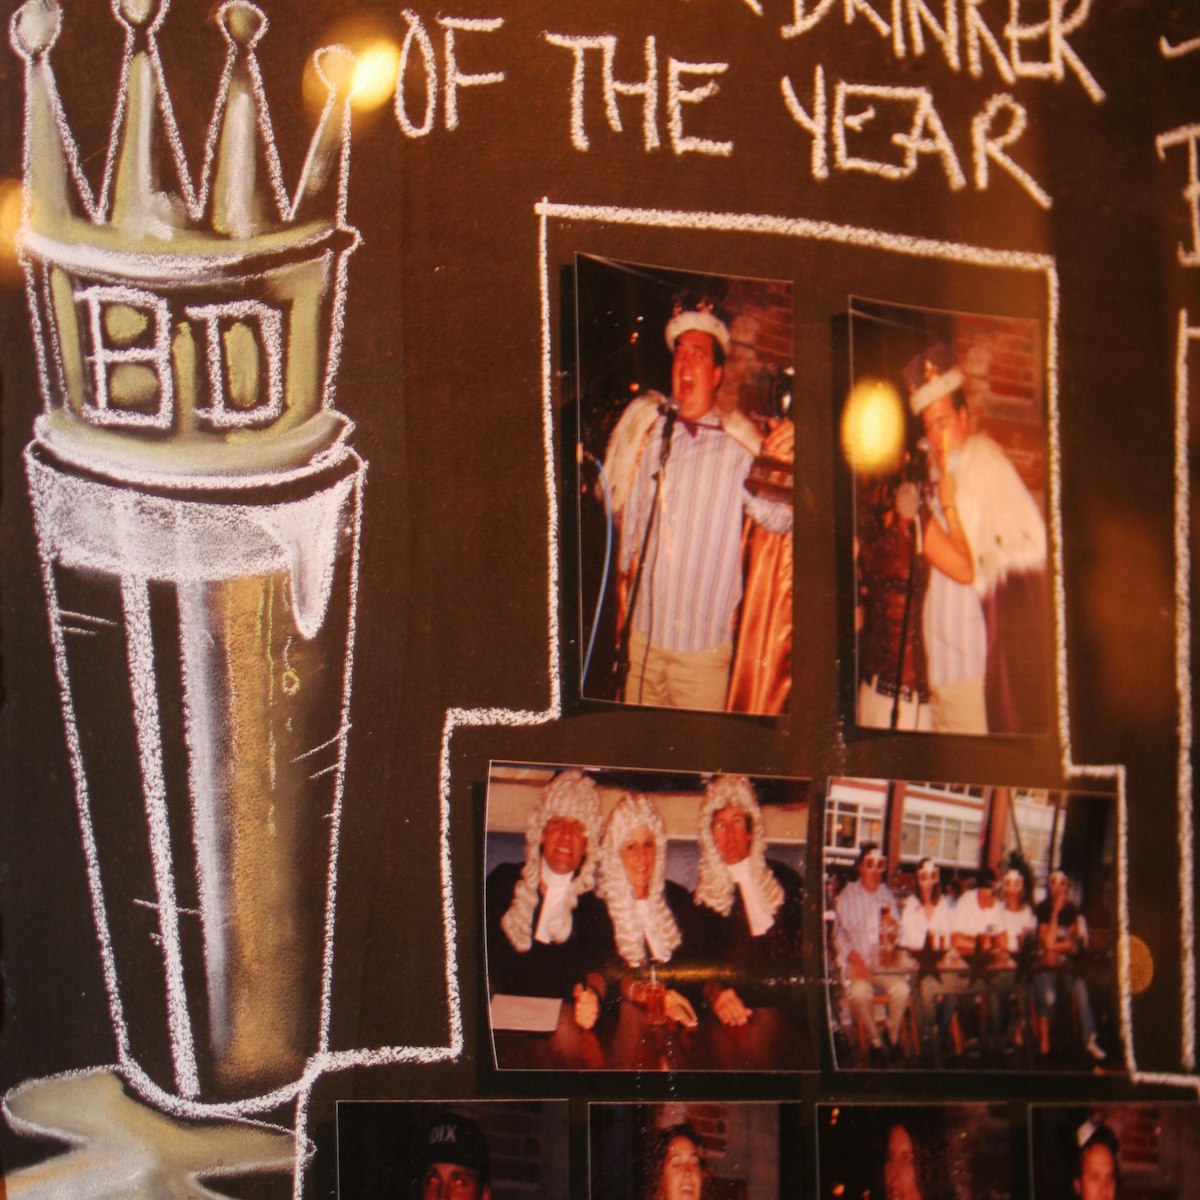 Beer Drinker of the Year Award sign at Yaletown Brewing Company, Yaletown.